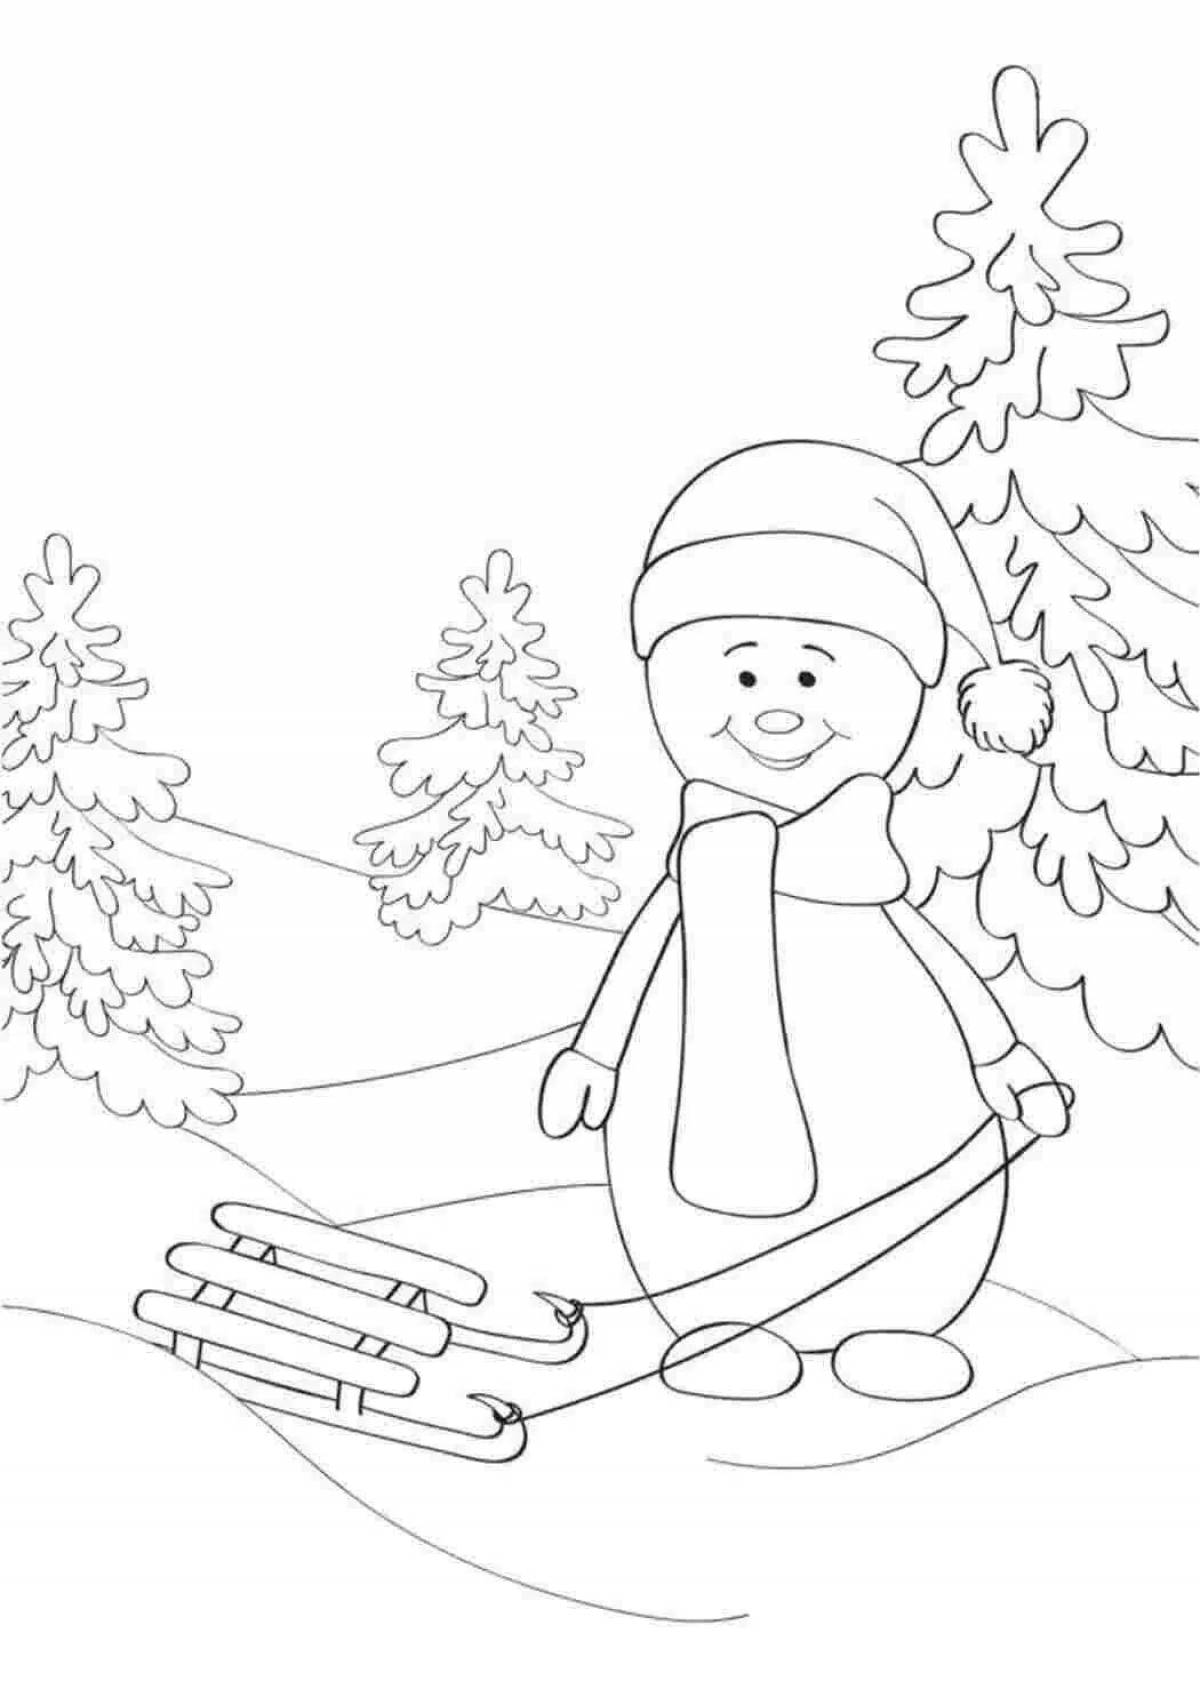 Coloring page of a joyful snowman on a sled